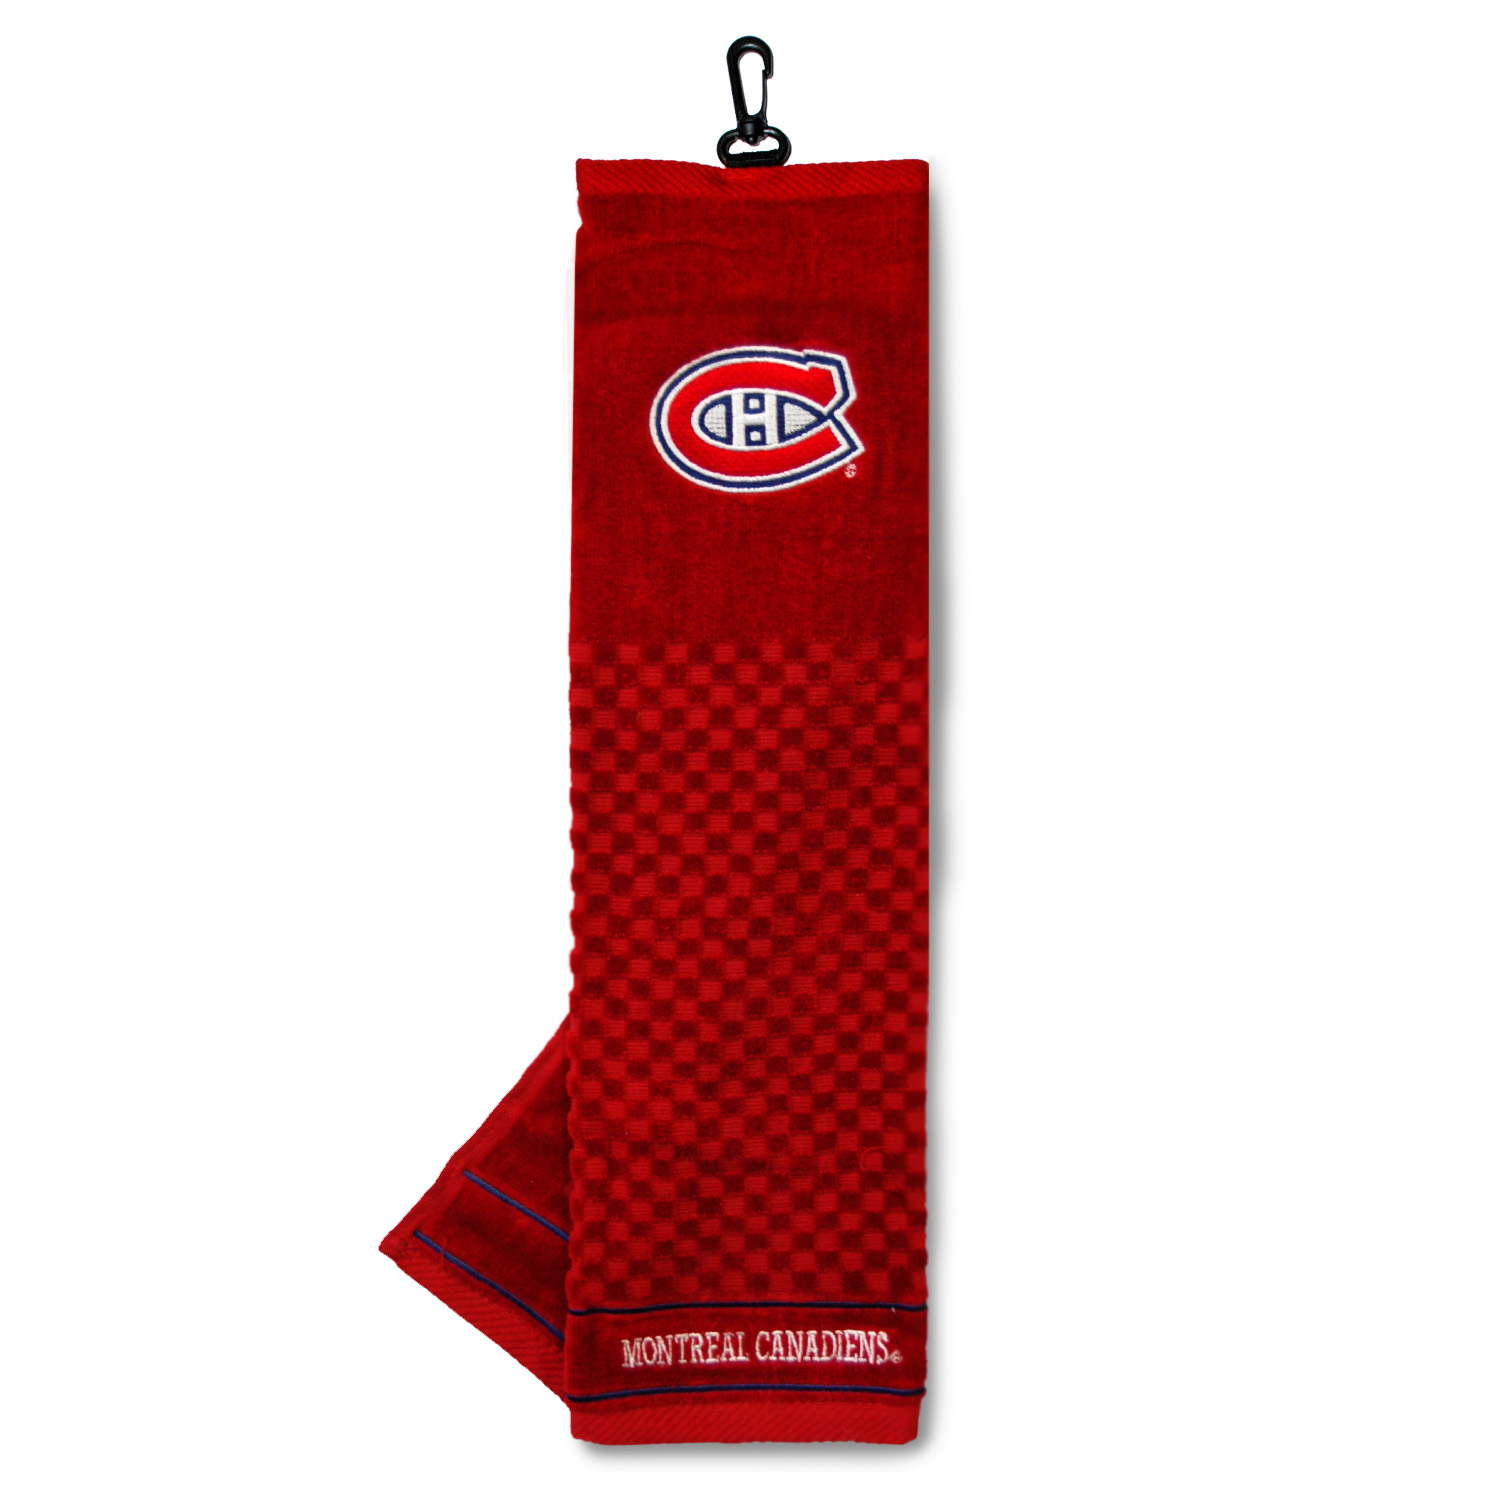 Montreal Canadiens Embroidered Towel